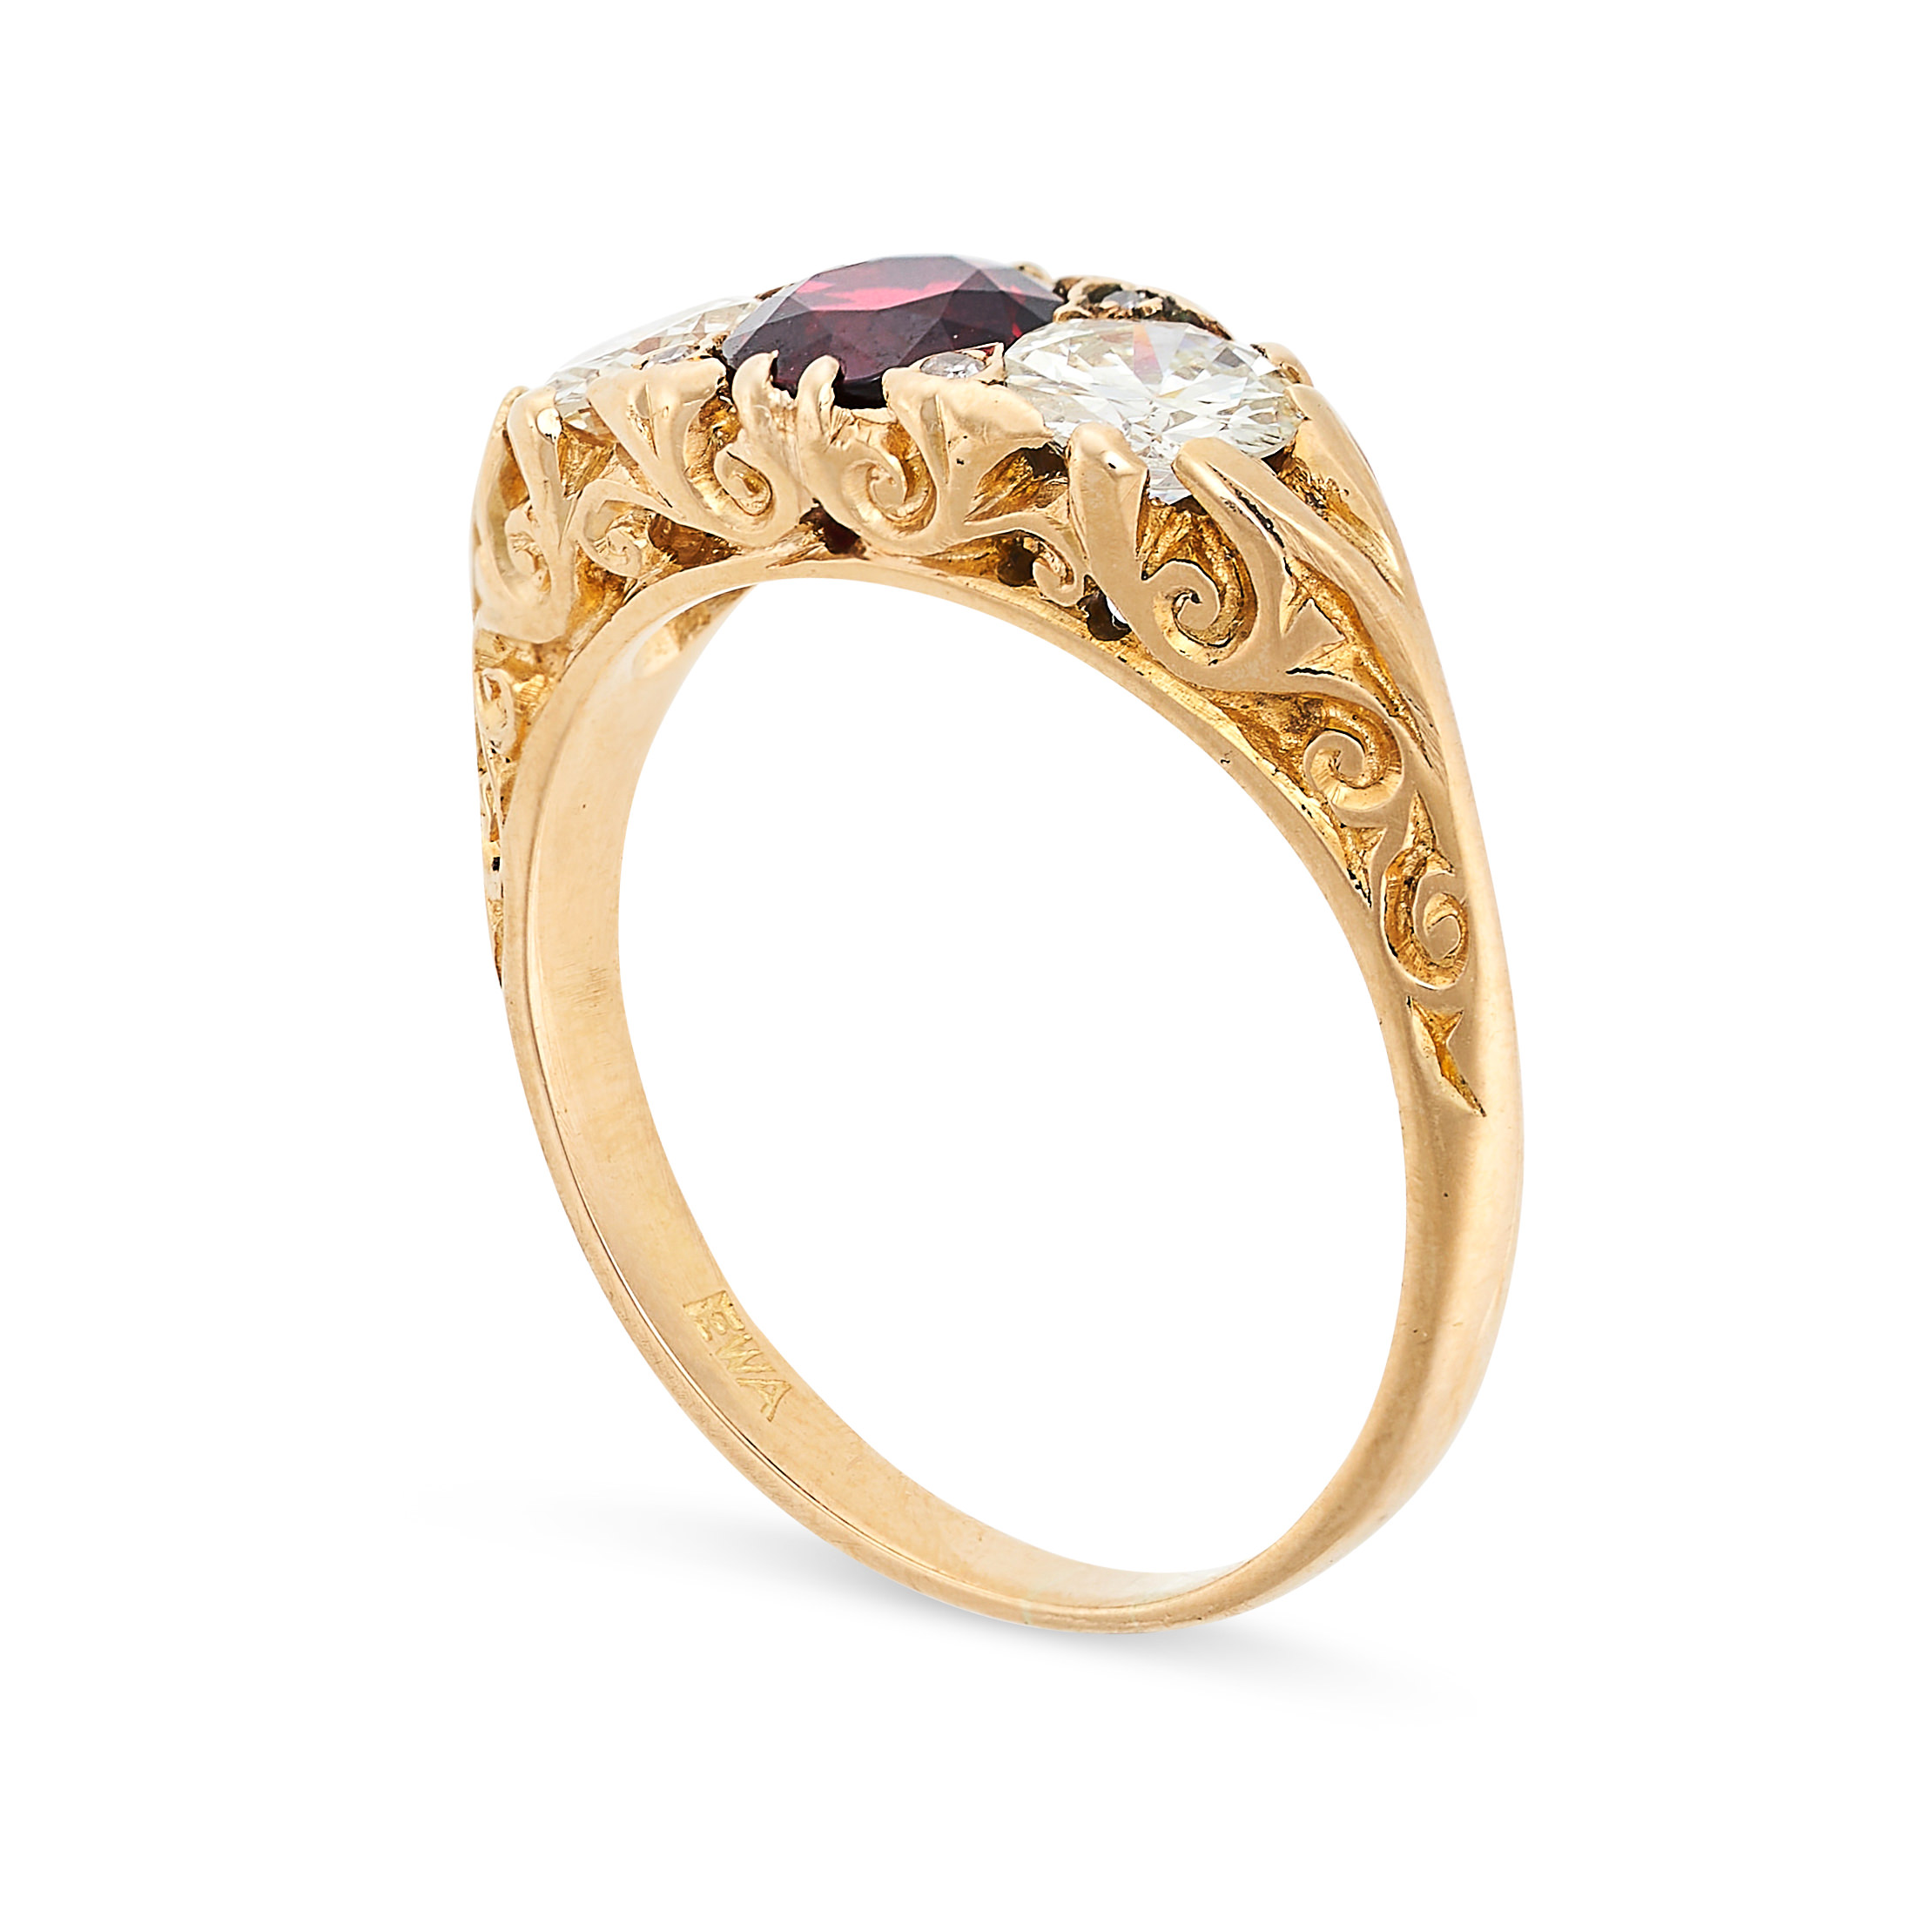 A RUBY AND DIAMOND RING in 18ct yellow gold, set with a round cut ruby of 0.97 carats between two - Image 2 of 2